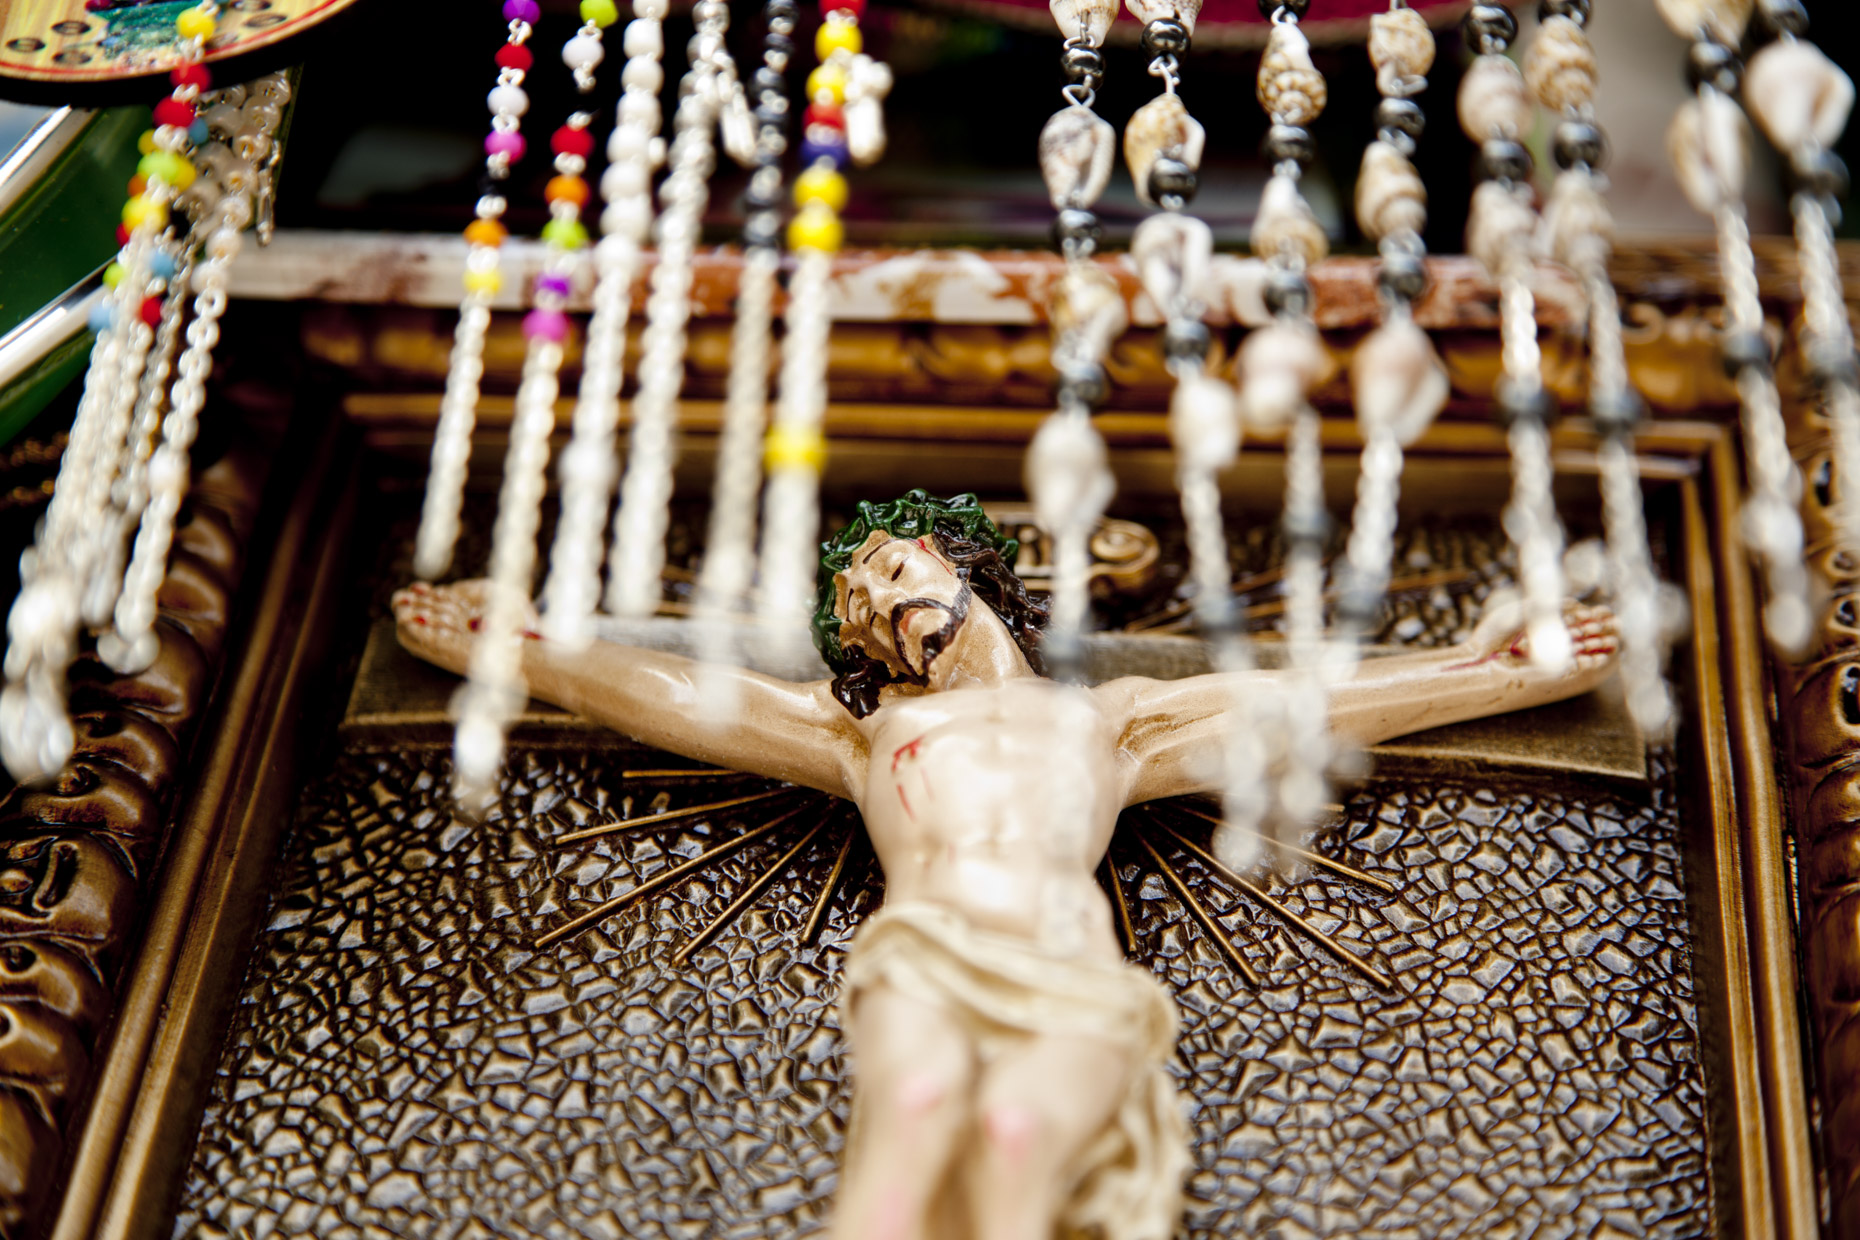 Close-up of Jesus sculpture behind strings of beads